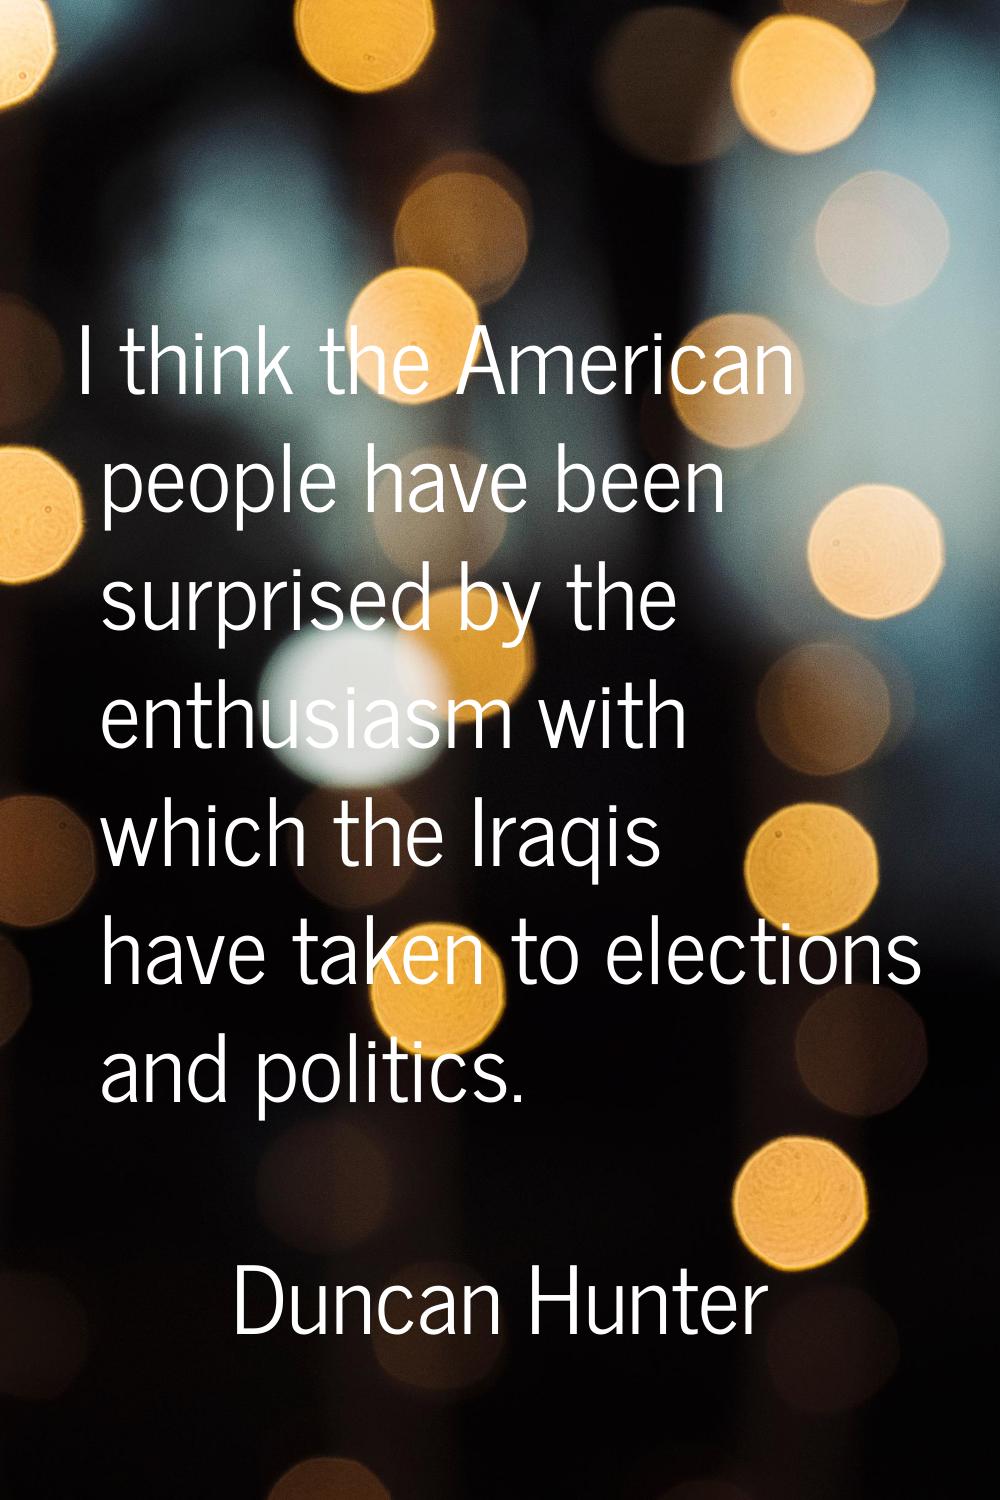 I think the American people have been surprised by the enthusiasm with which the Iraqis have taken 